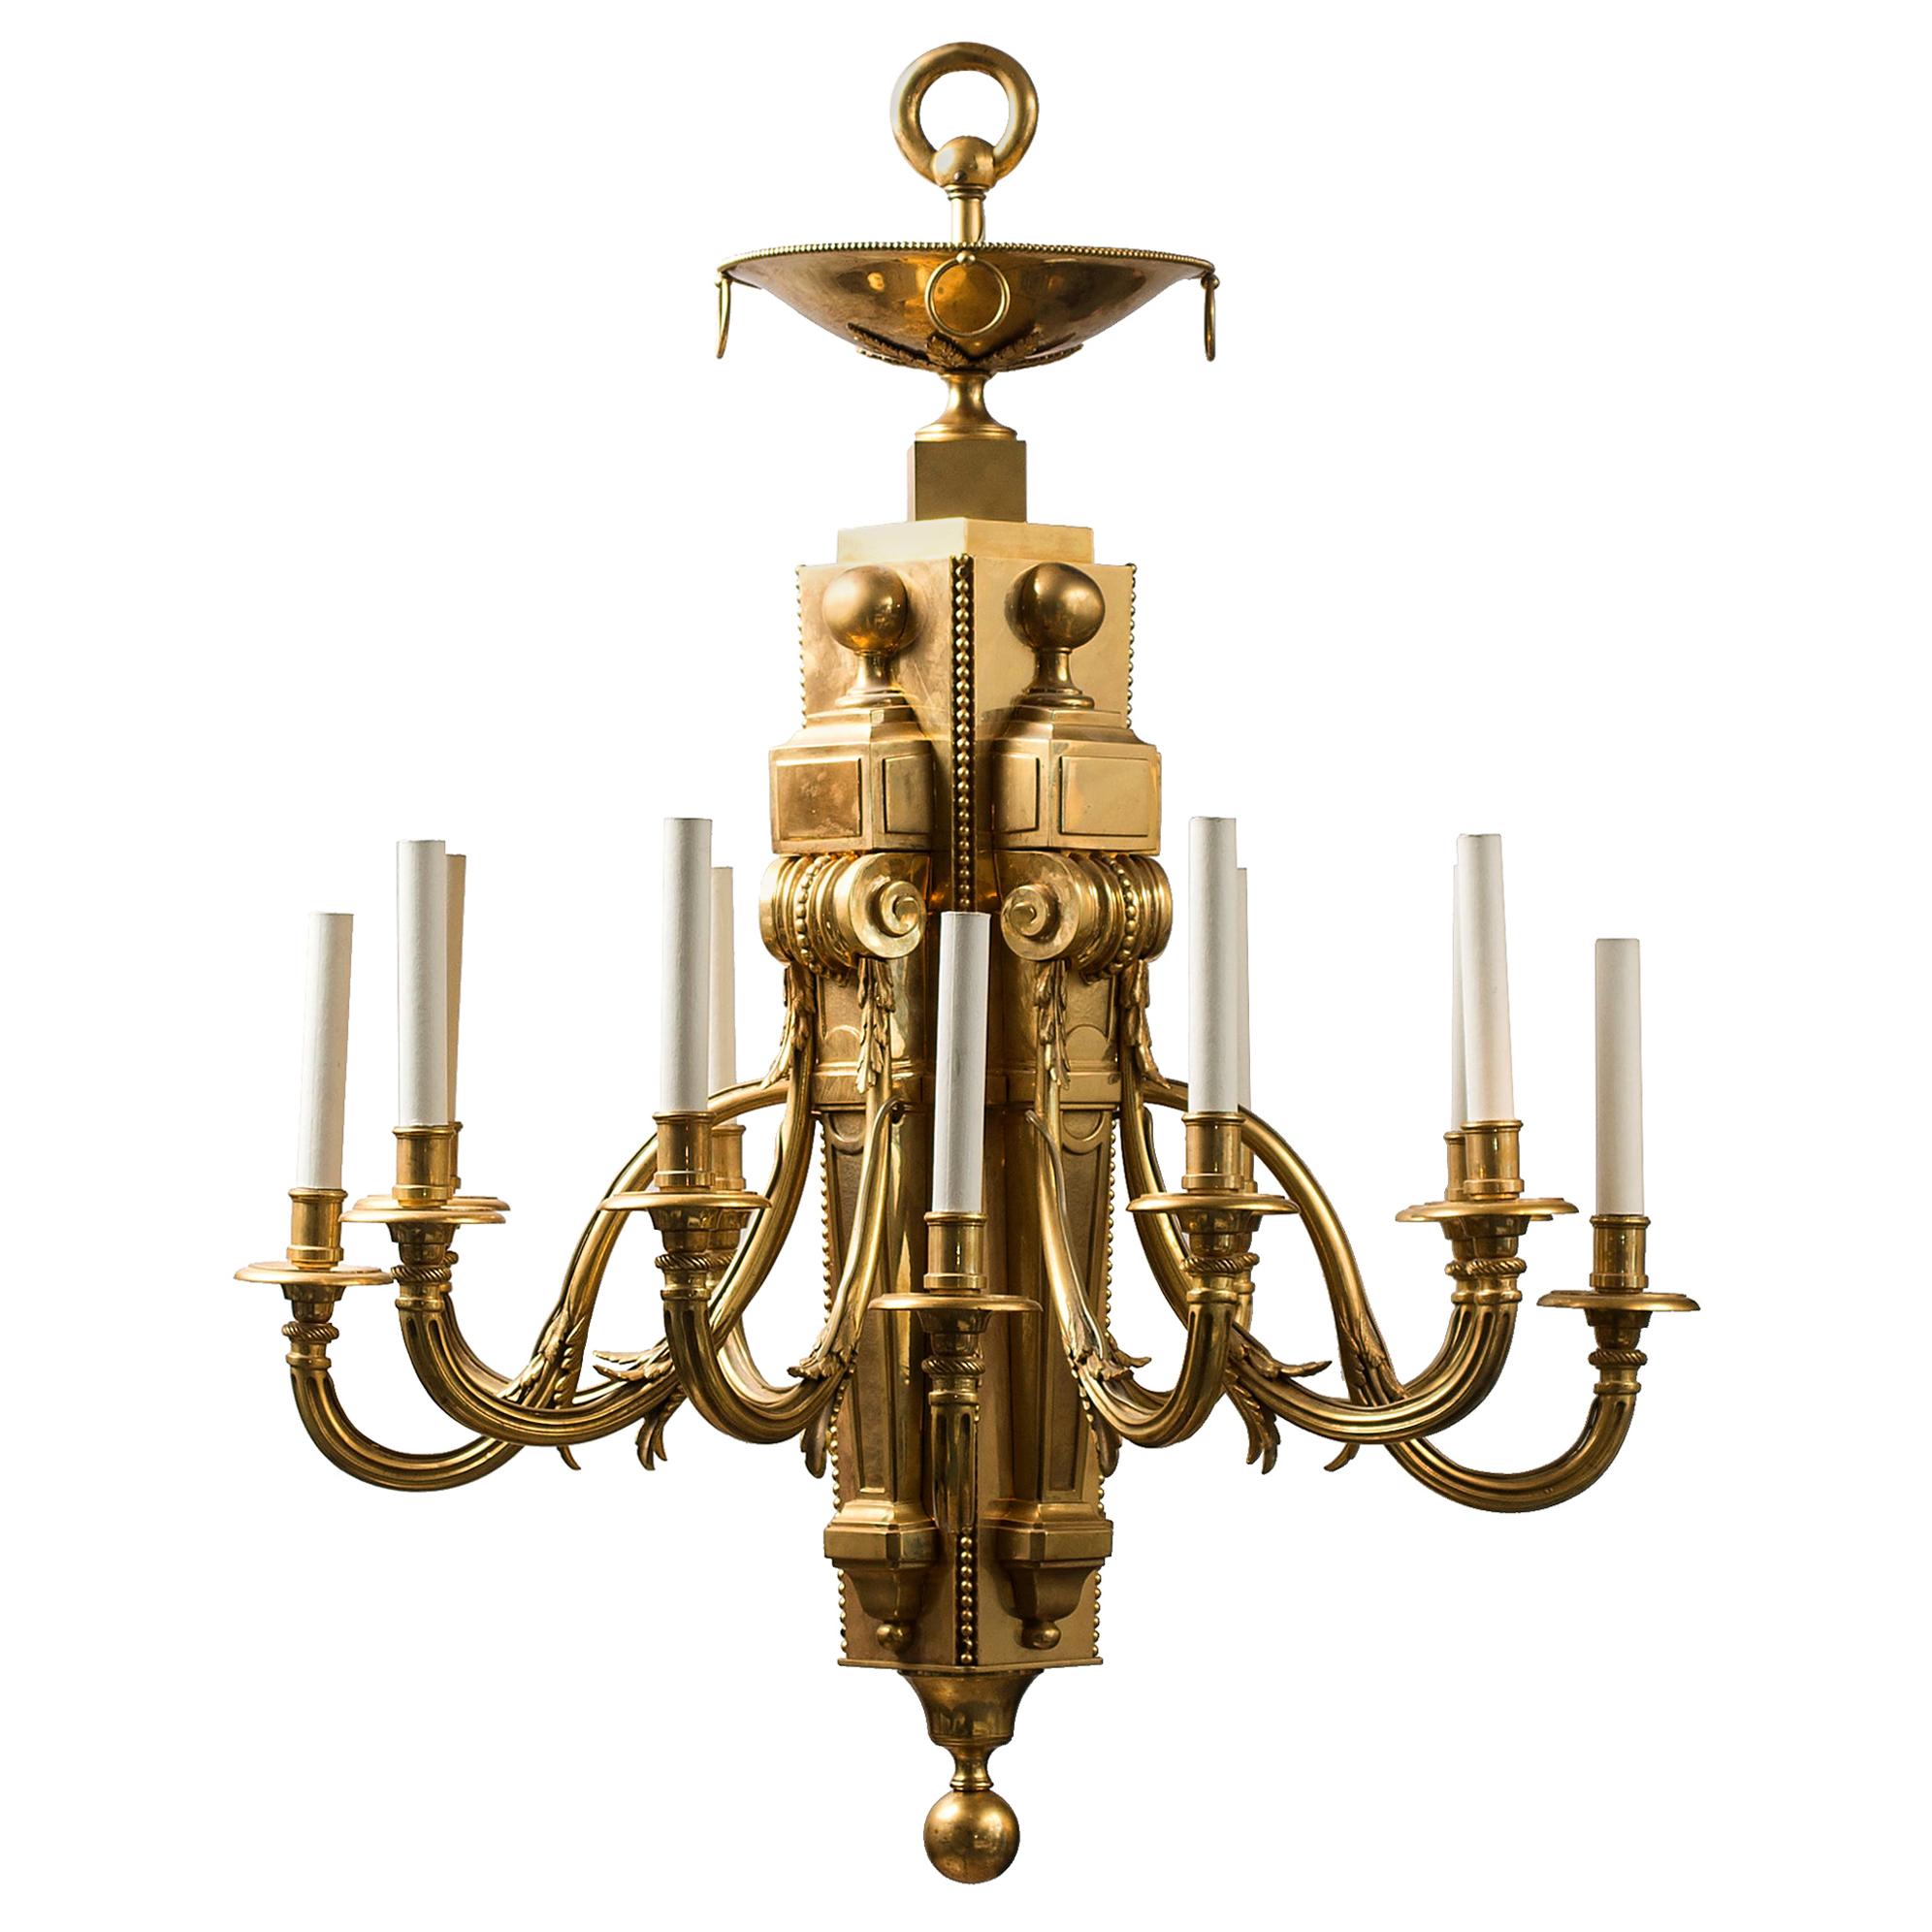 French Louis XVI Style Neoclassical Gilt Bronze Chandelier For Sale